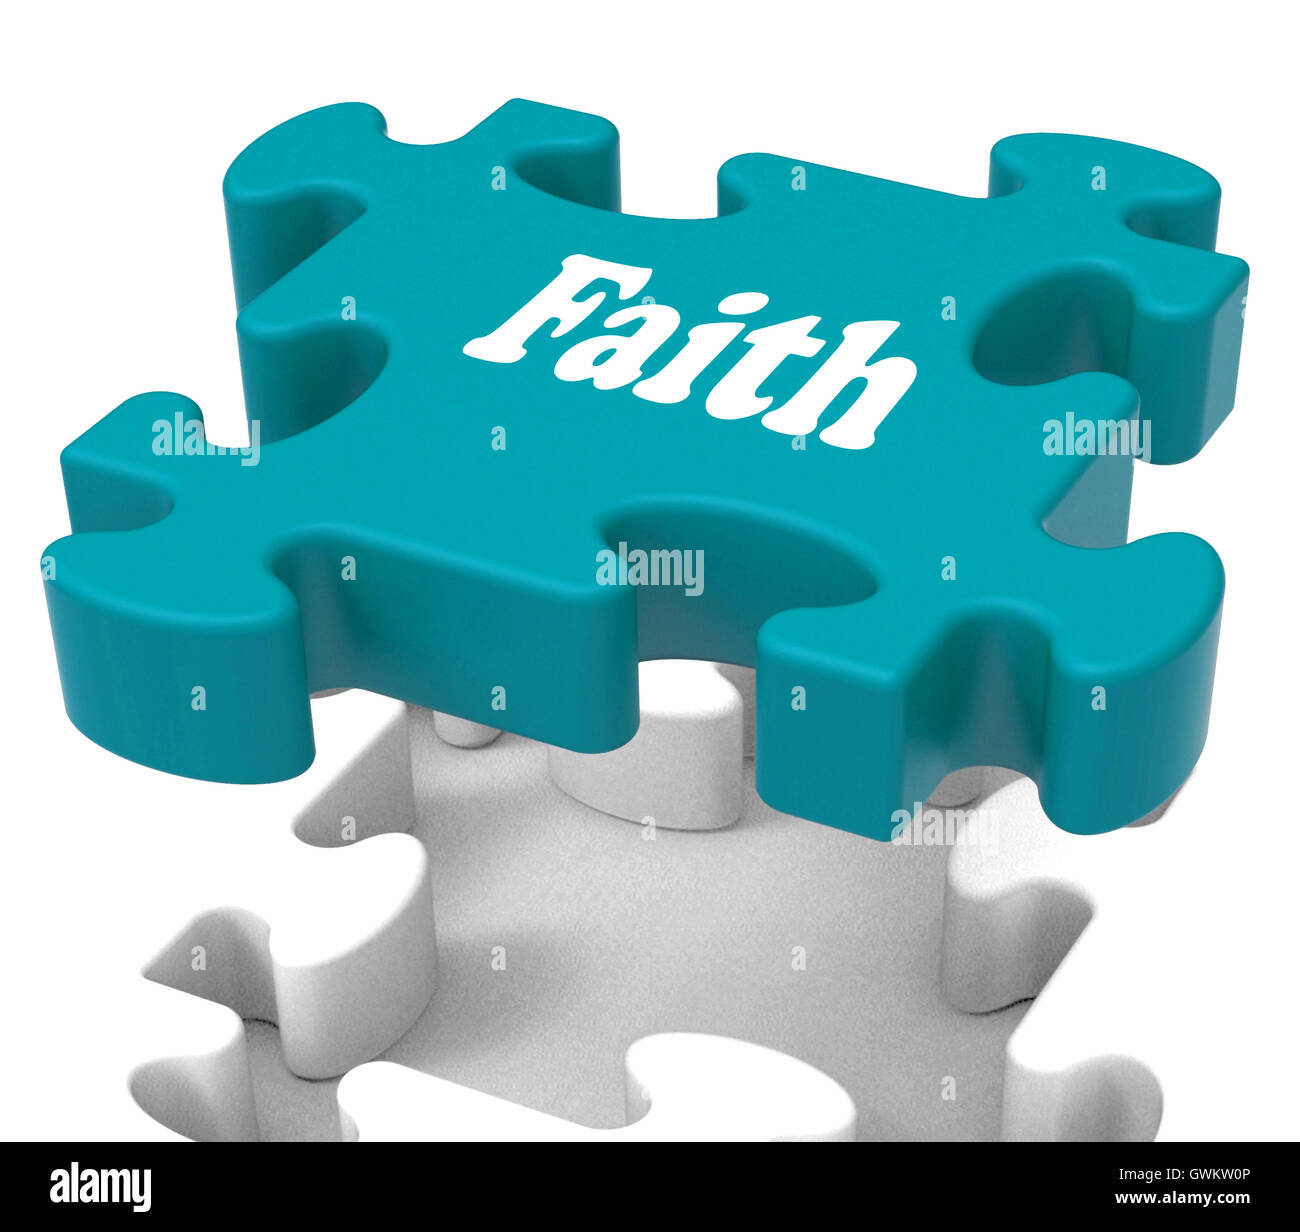 Faith Jigsaw Shows Believing Religious Belief Or Trust Stock Photo